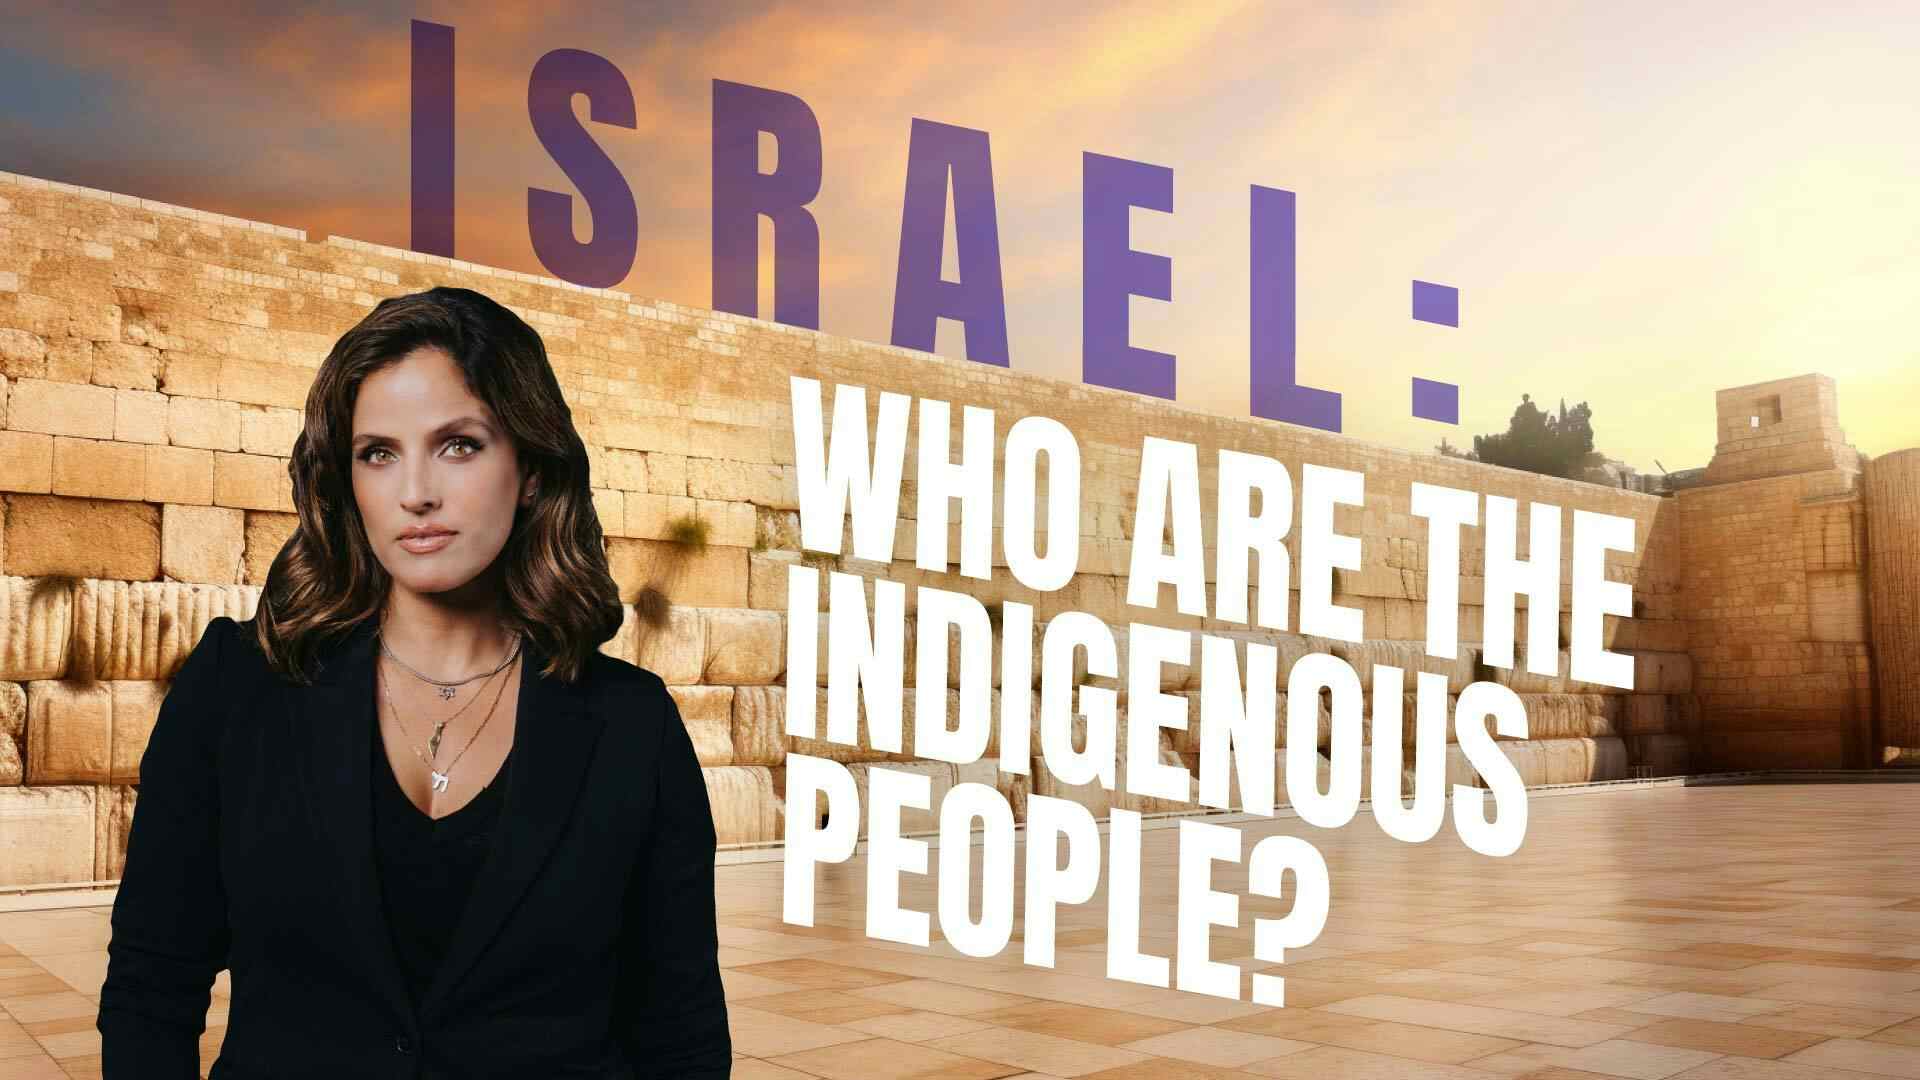 Israel: Who Are the Indigenous People?